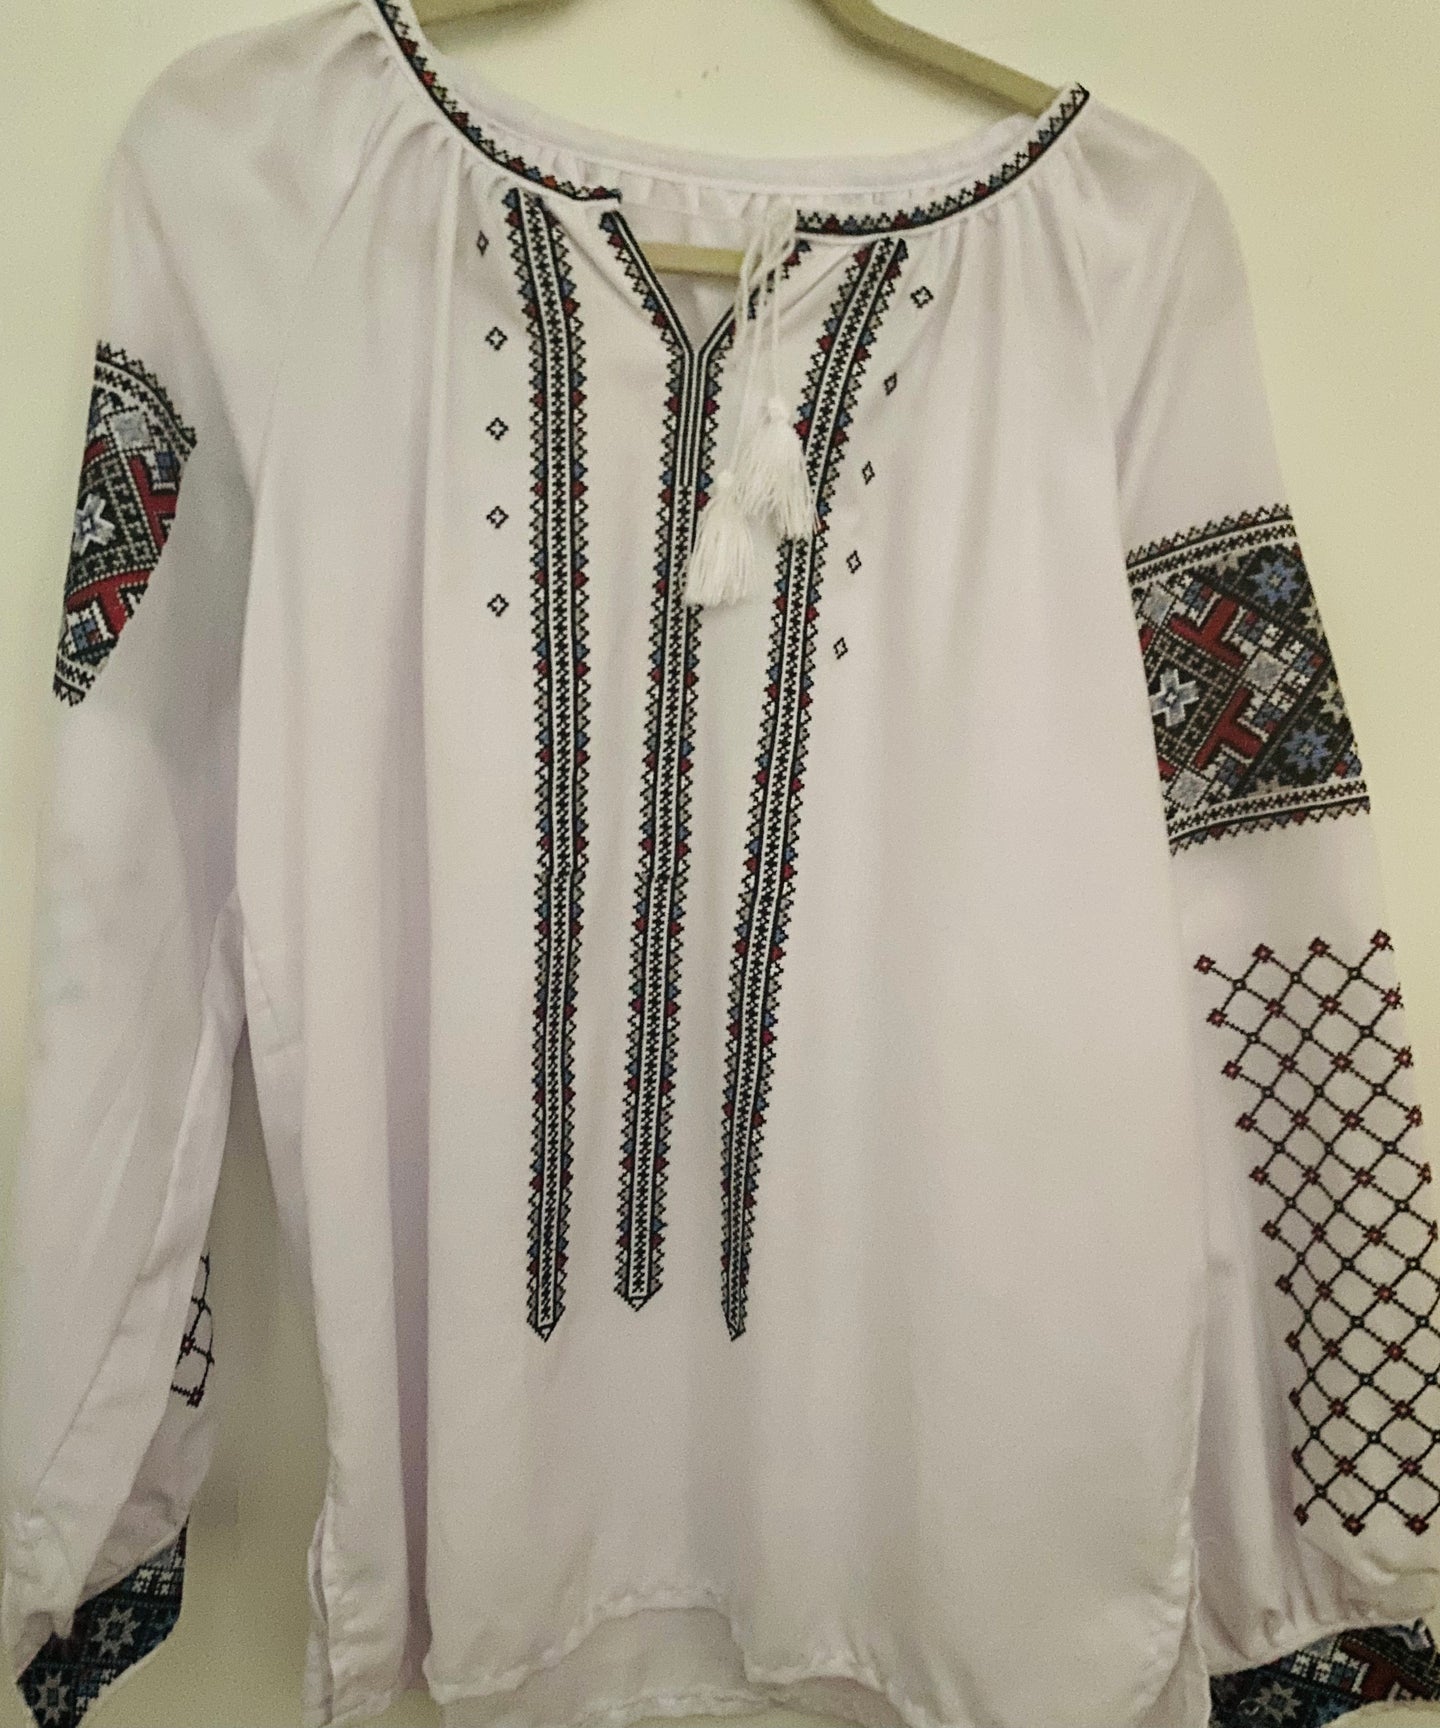 Blouse Embroidered Womens red ,black ,blue,grey on white  # 290